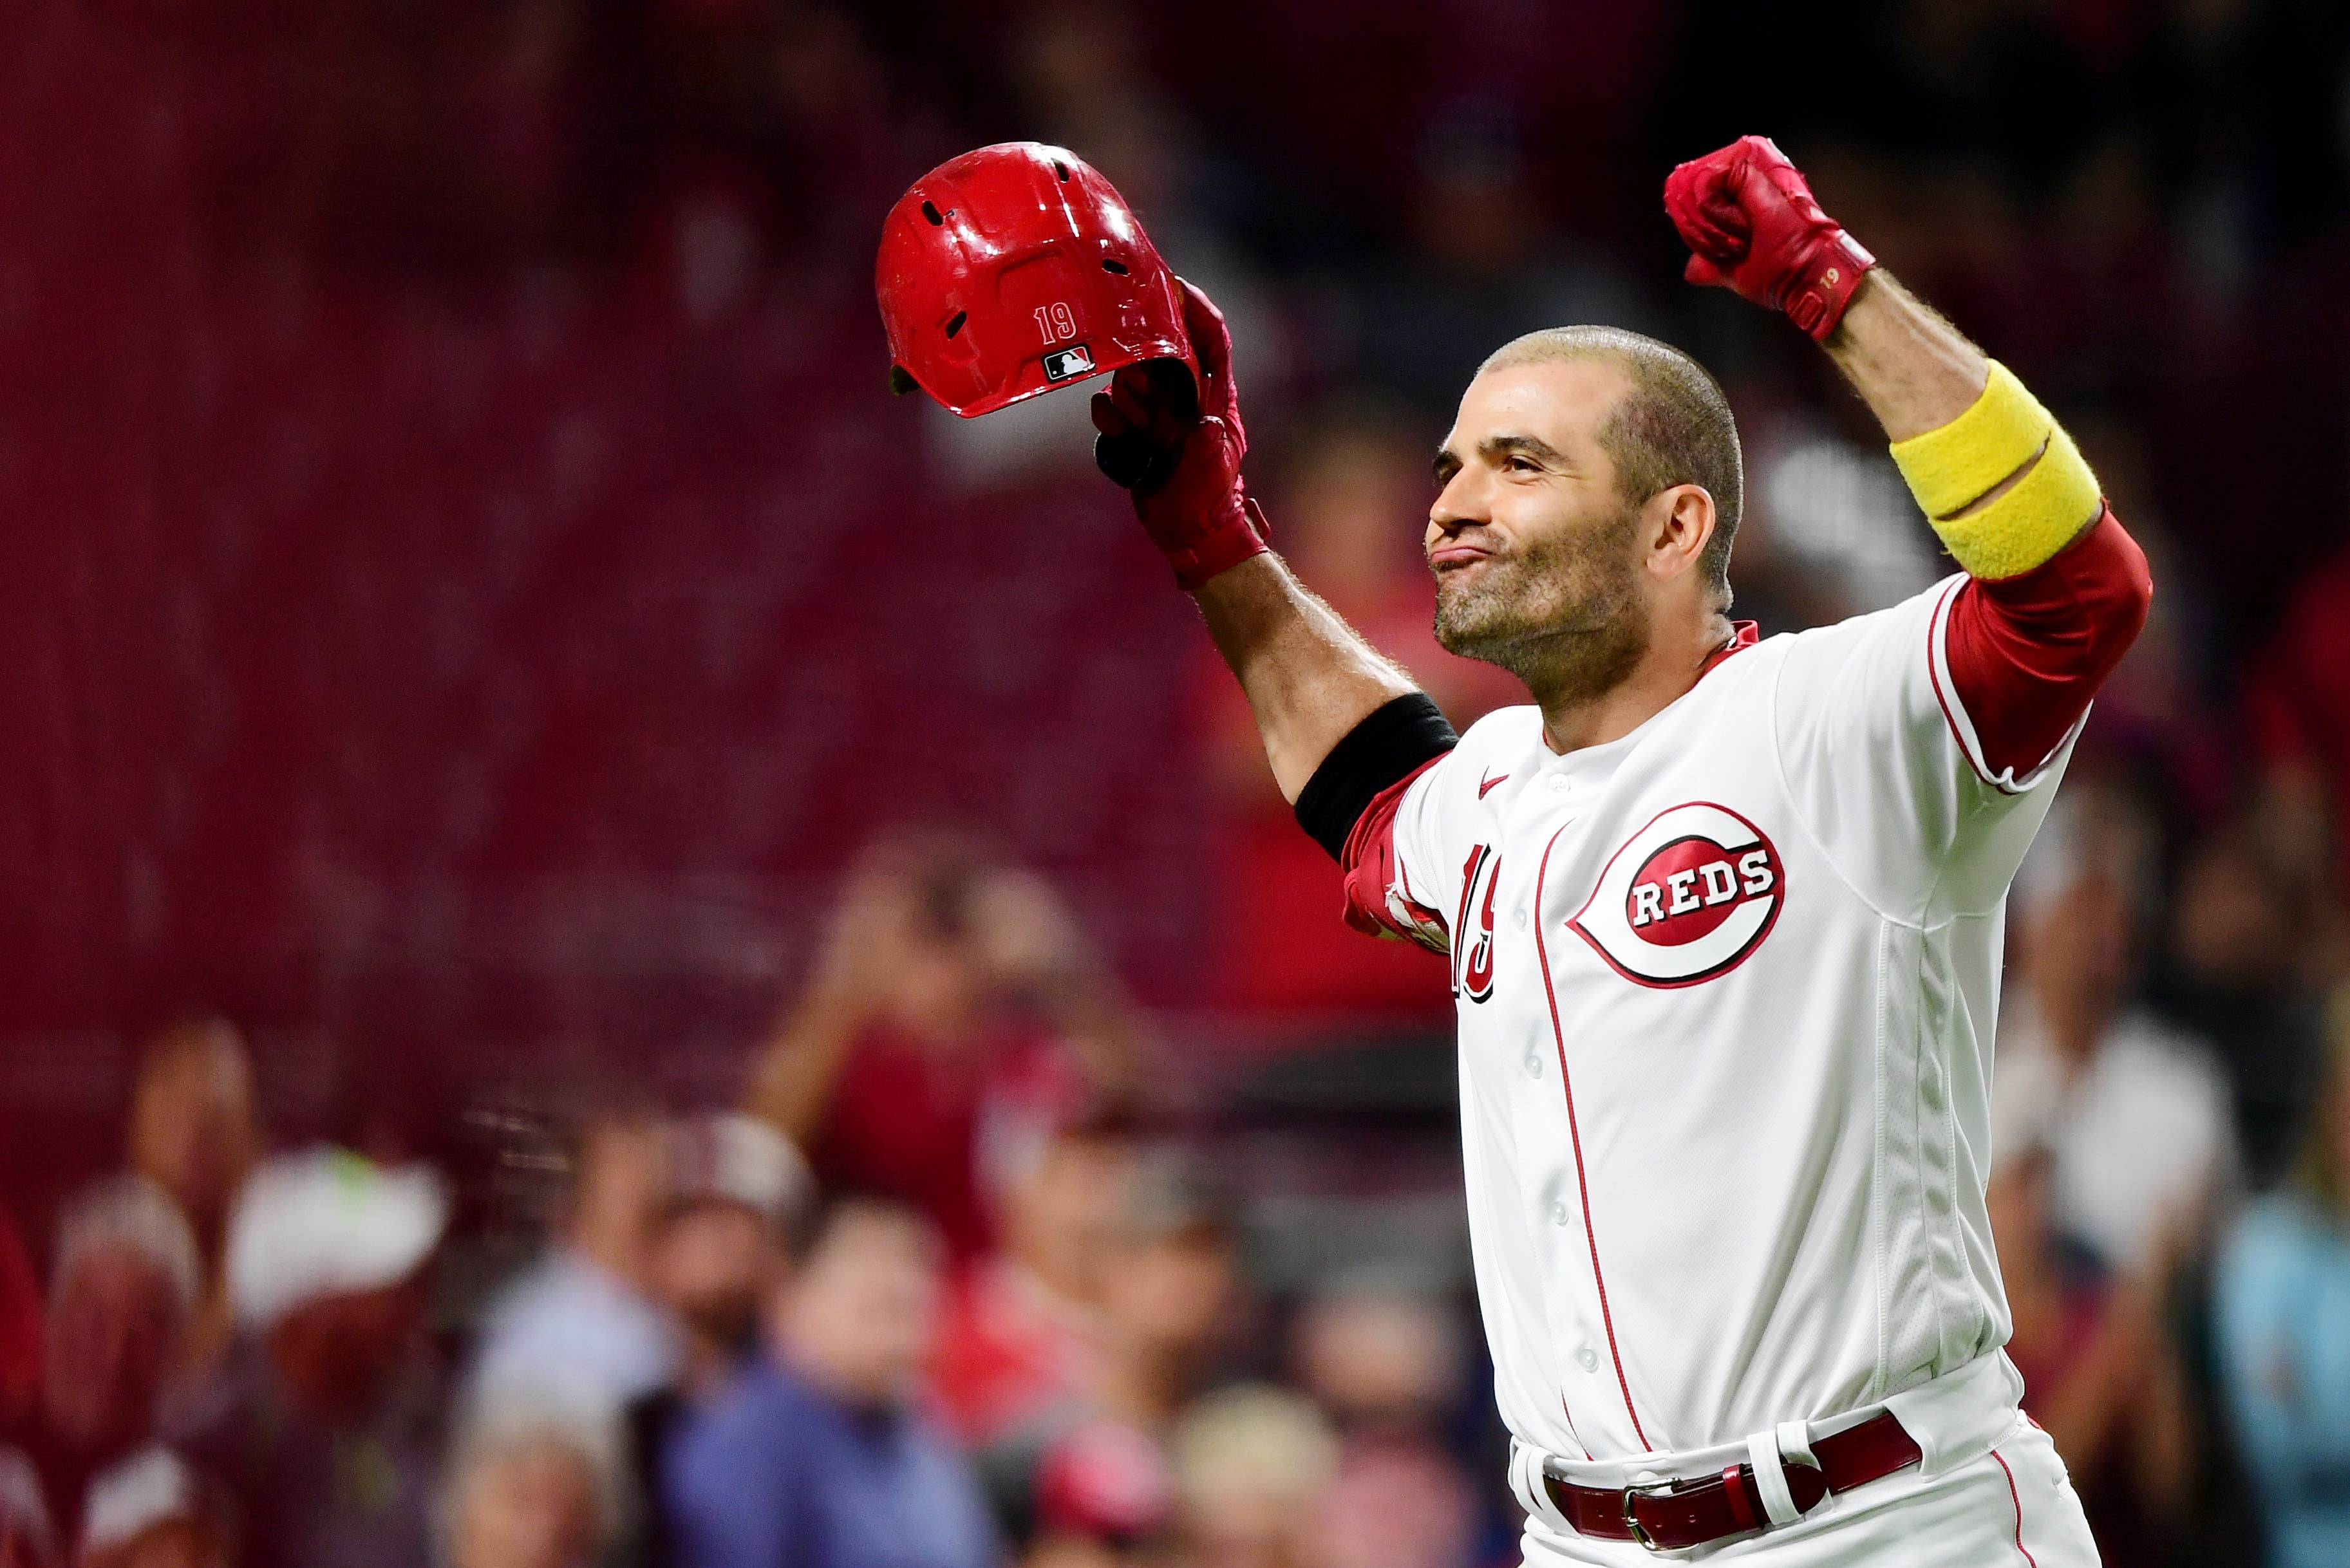 Joey Votto Predicts Alien Invasion After MLB Asks For Bold